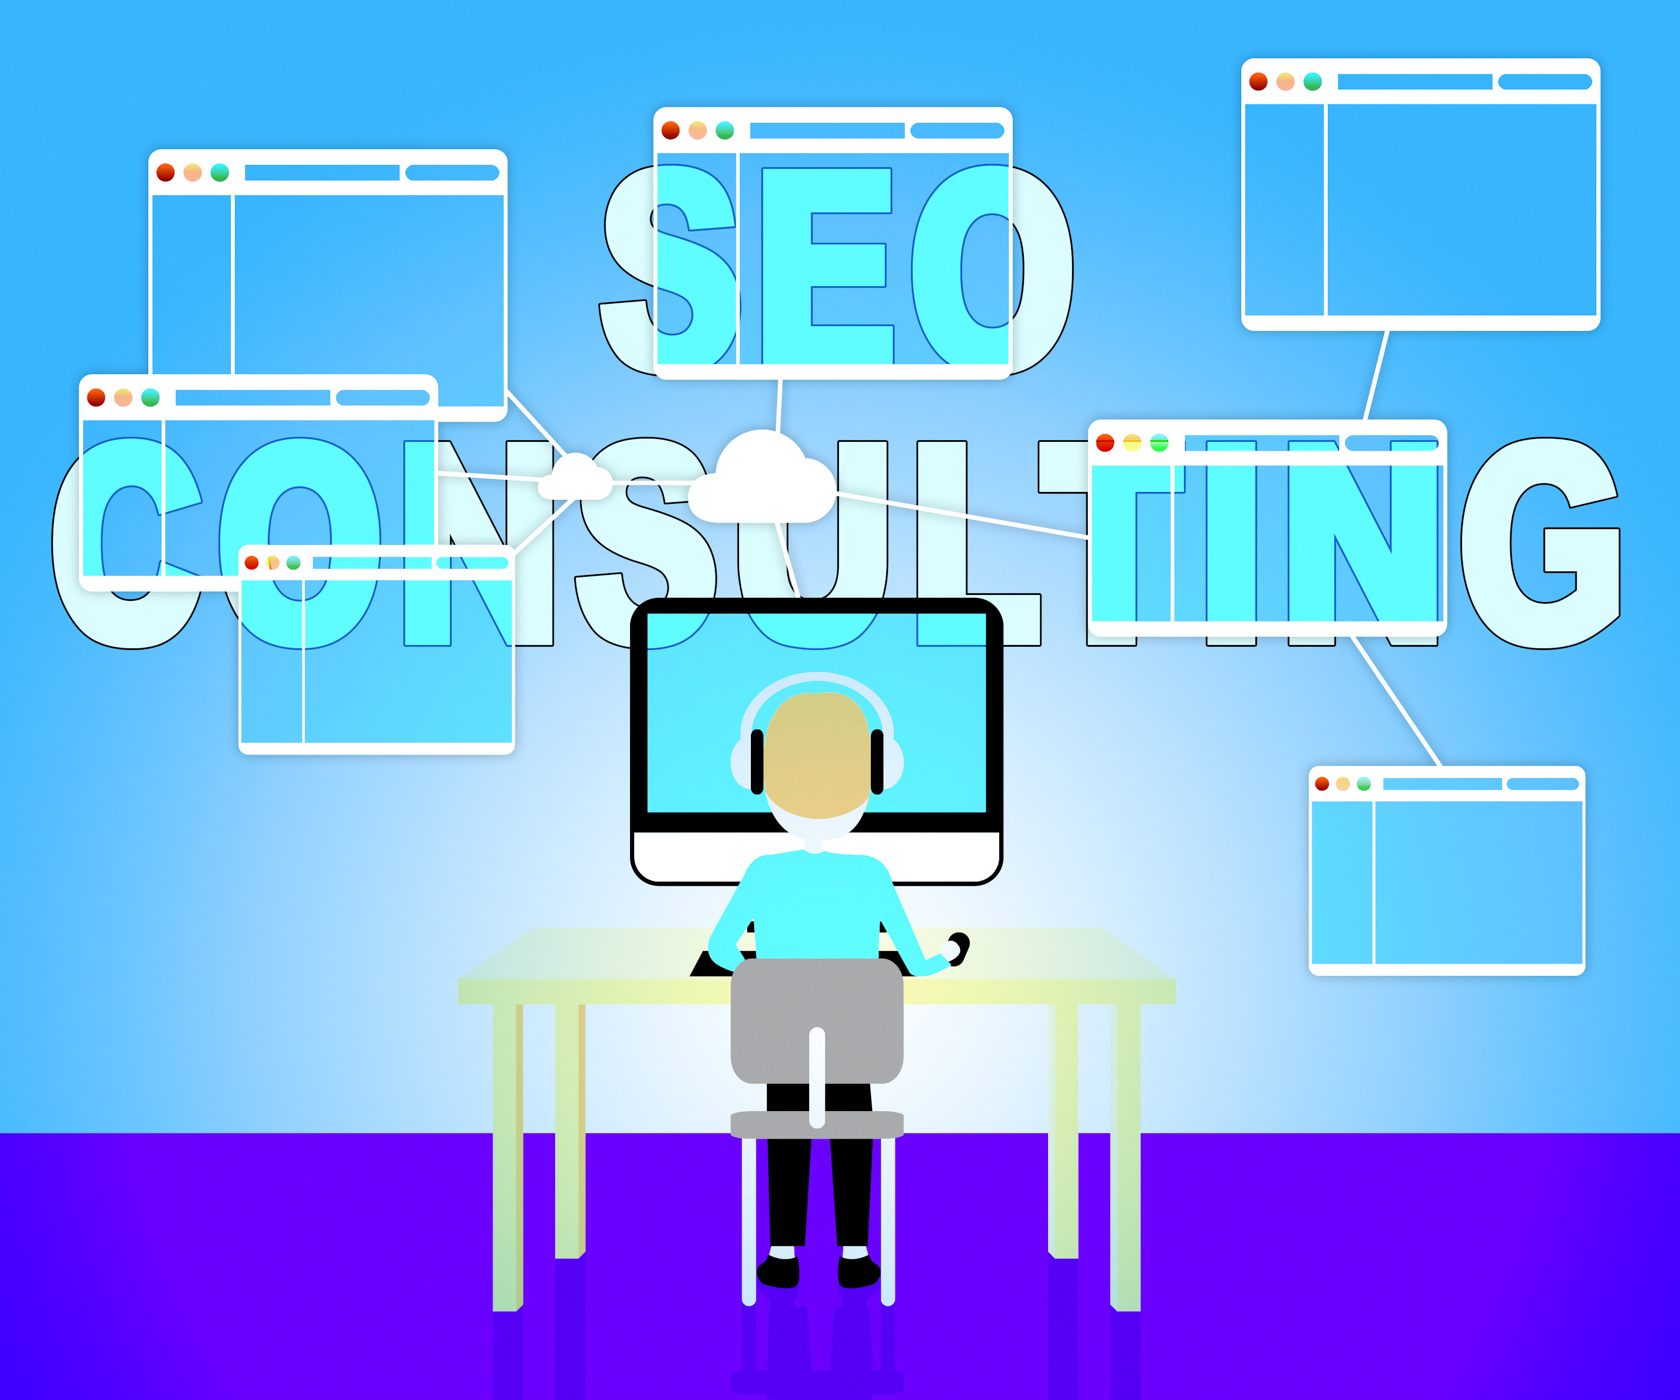 Seo consulting represents search engines and consultation photo